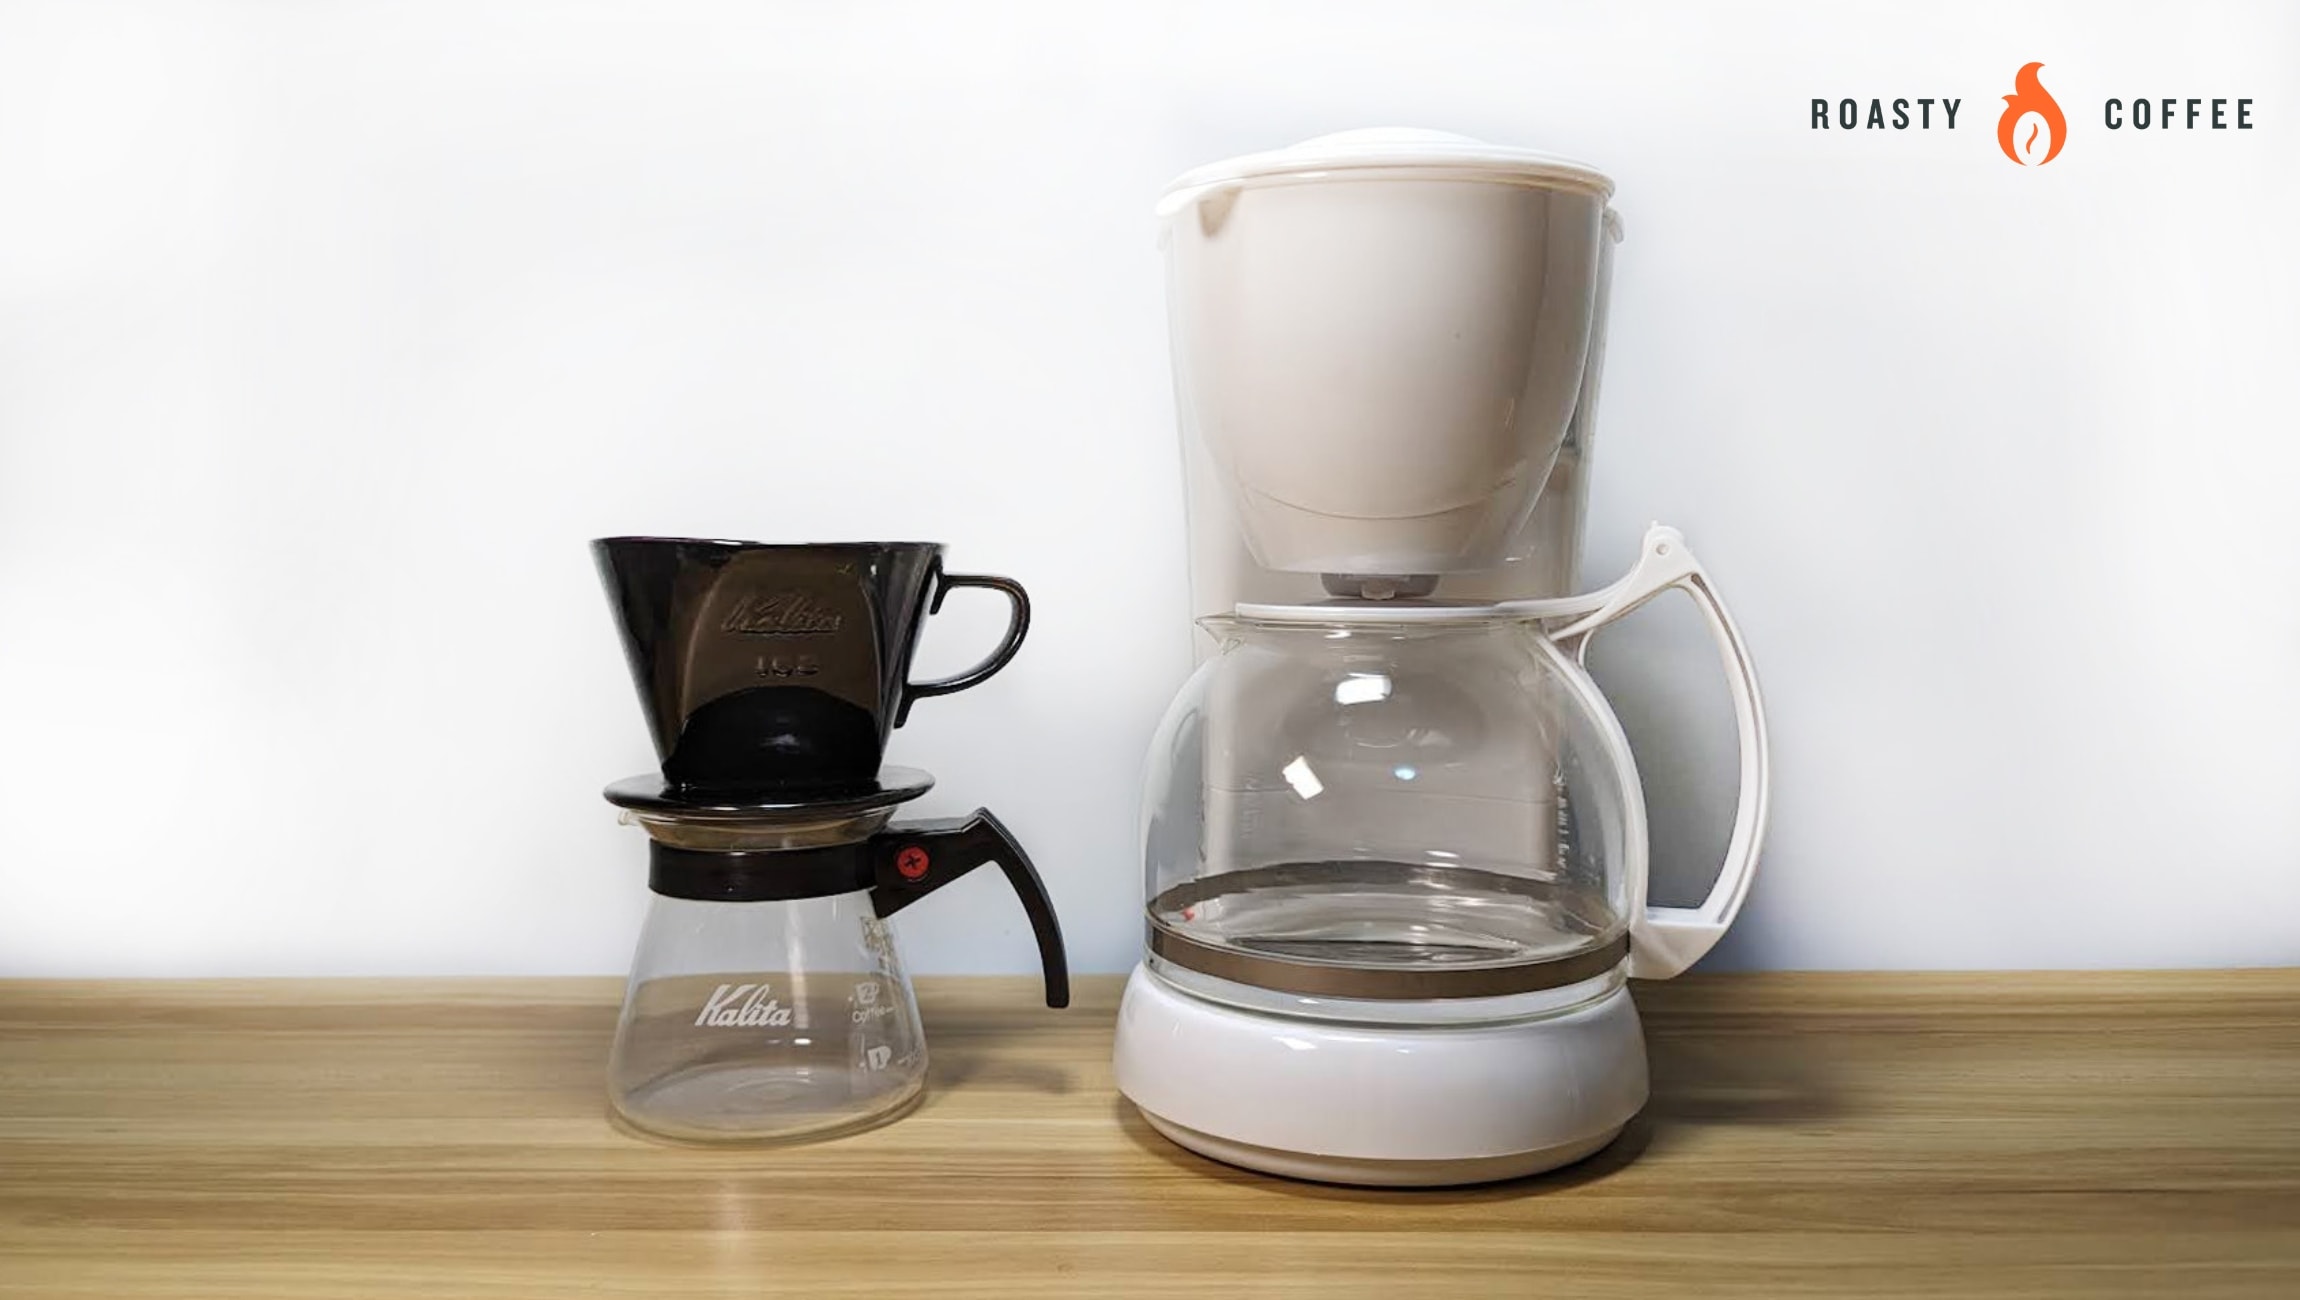 Coffee Percolator Vs Drip: What's The Difference?